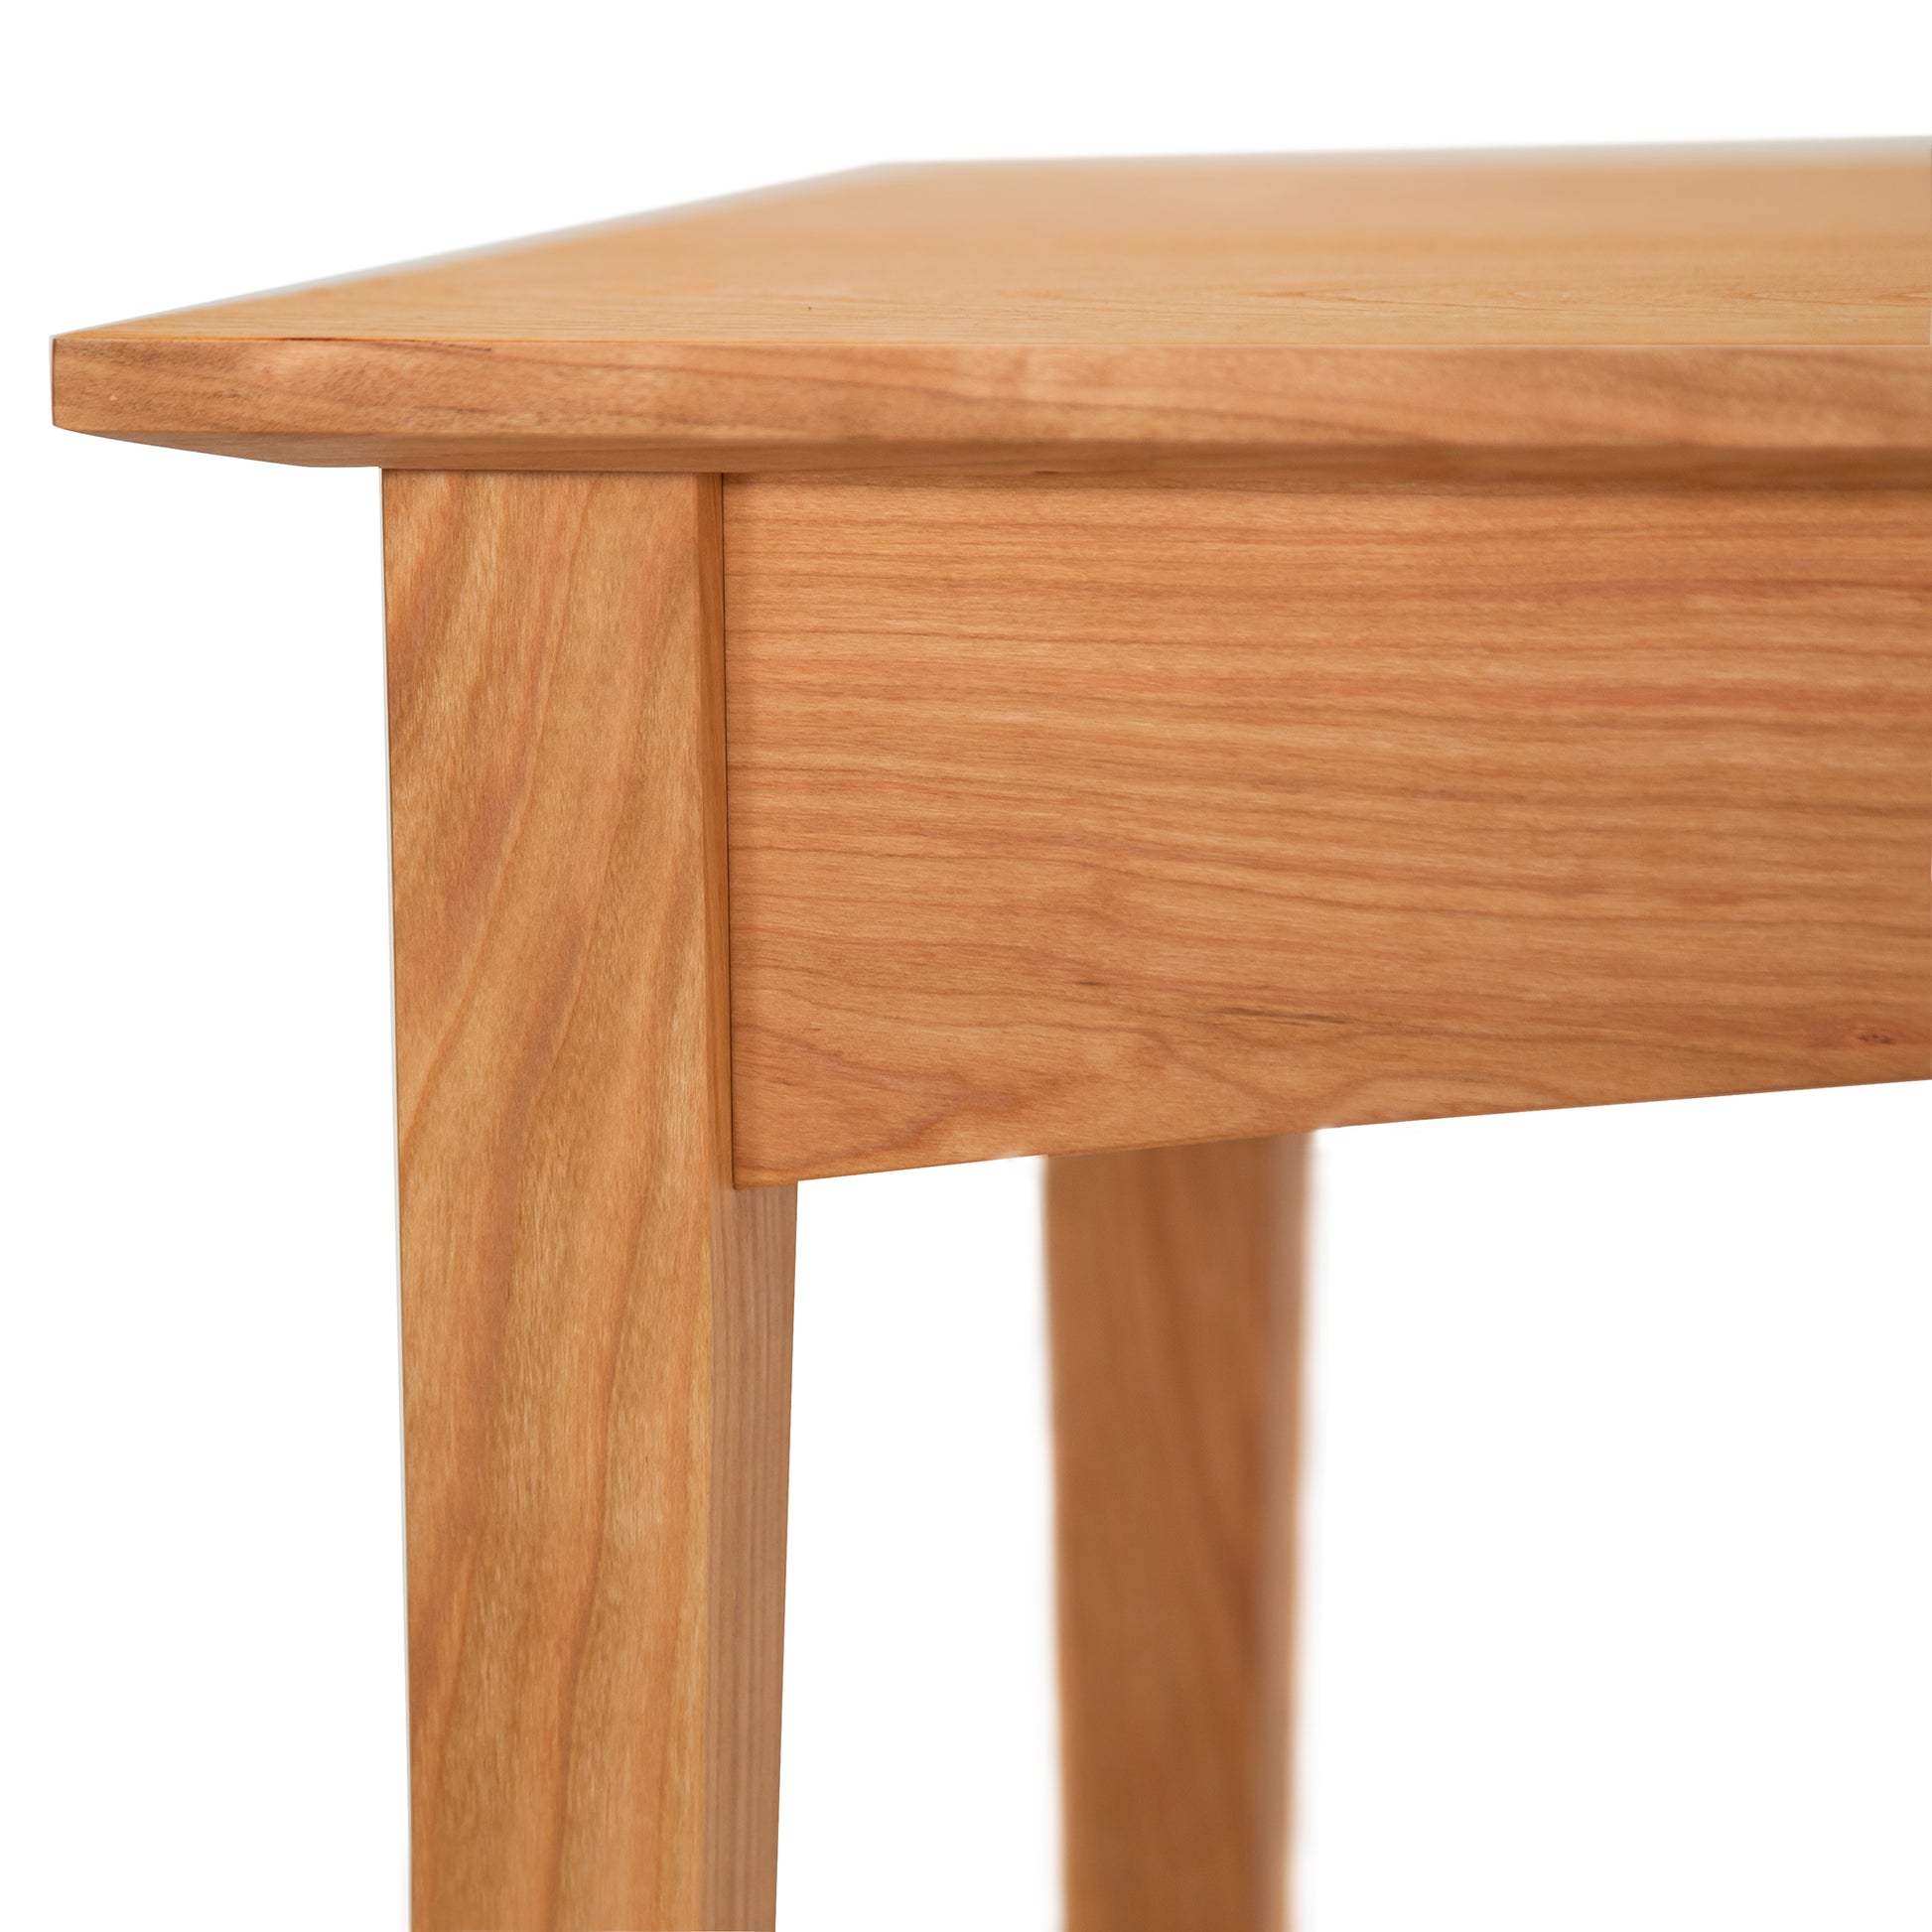 A handcrafted image of an American Shaker Style Coffee Table made from natural cherry wood by Maple Corner Woodworks.